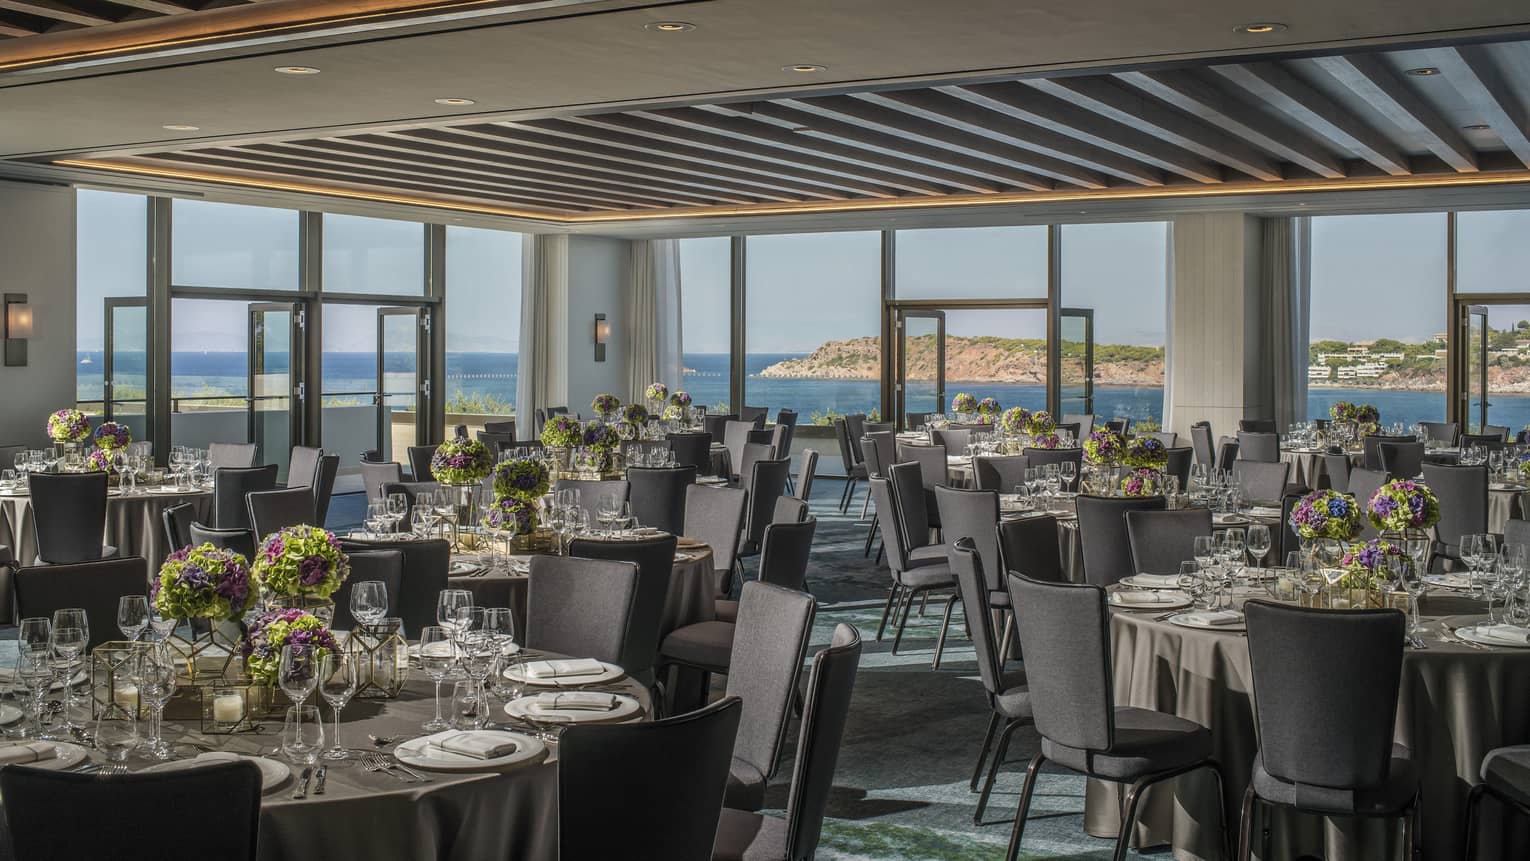 Light filled Nafsika Ballroom with round tables, grey chairs, flowers, wine glasses overlooking ocean 